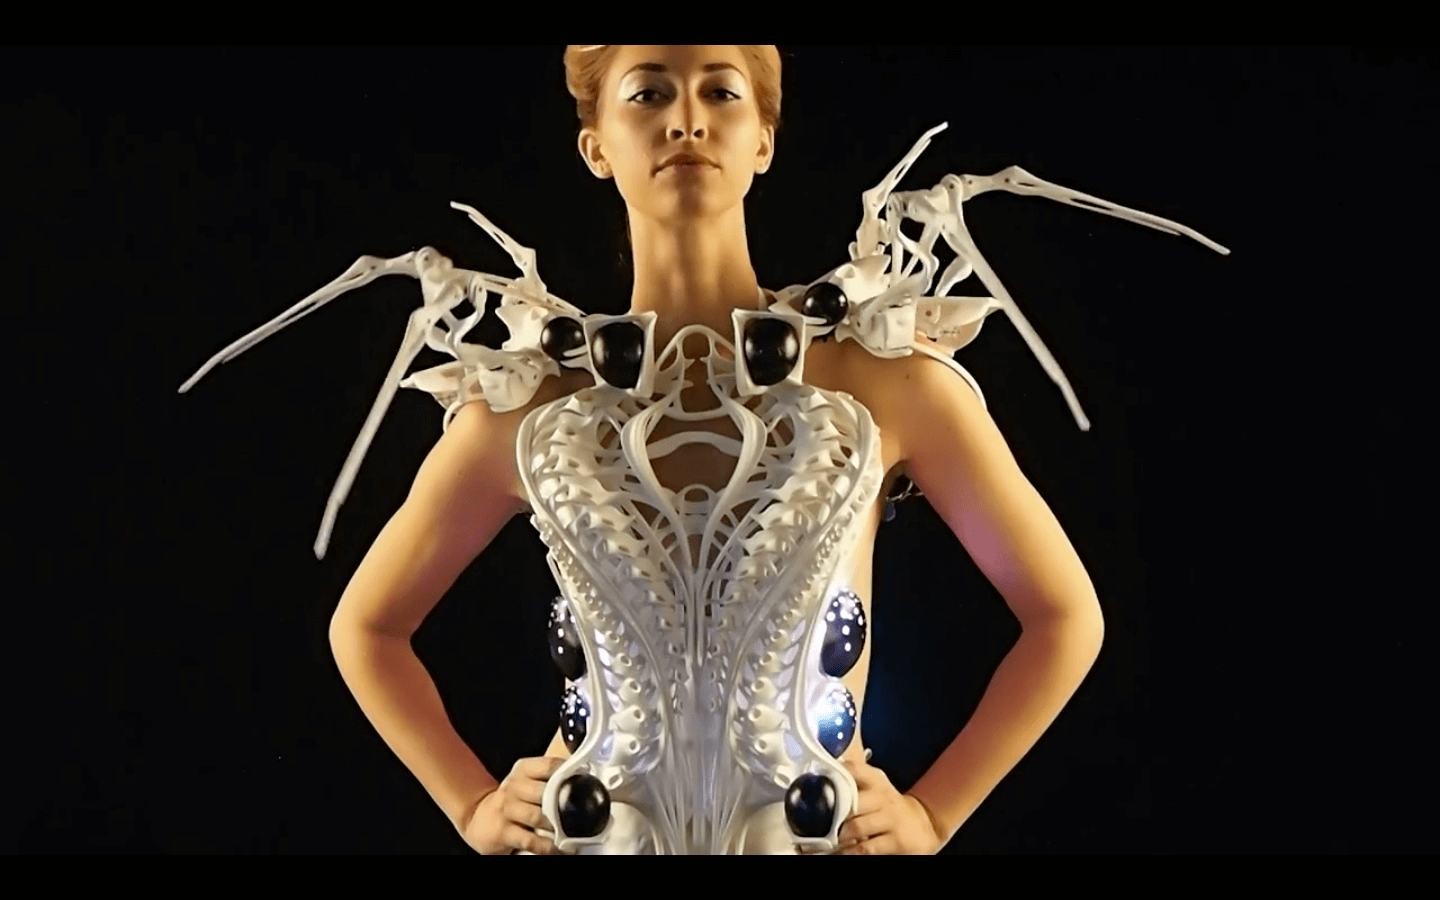 Space-Inspired 3D Printed Vortex Dress Is From Another Planet